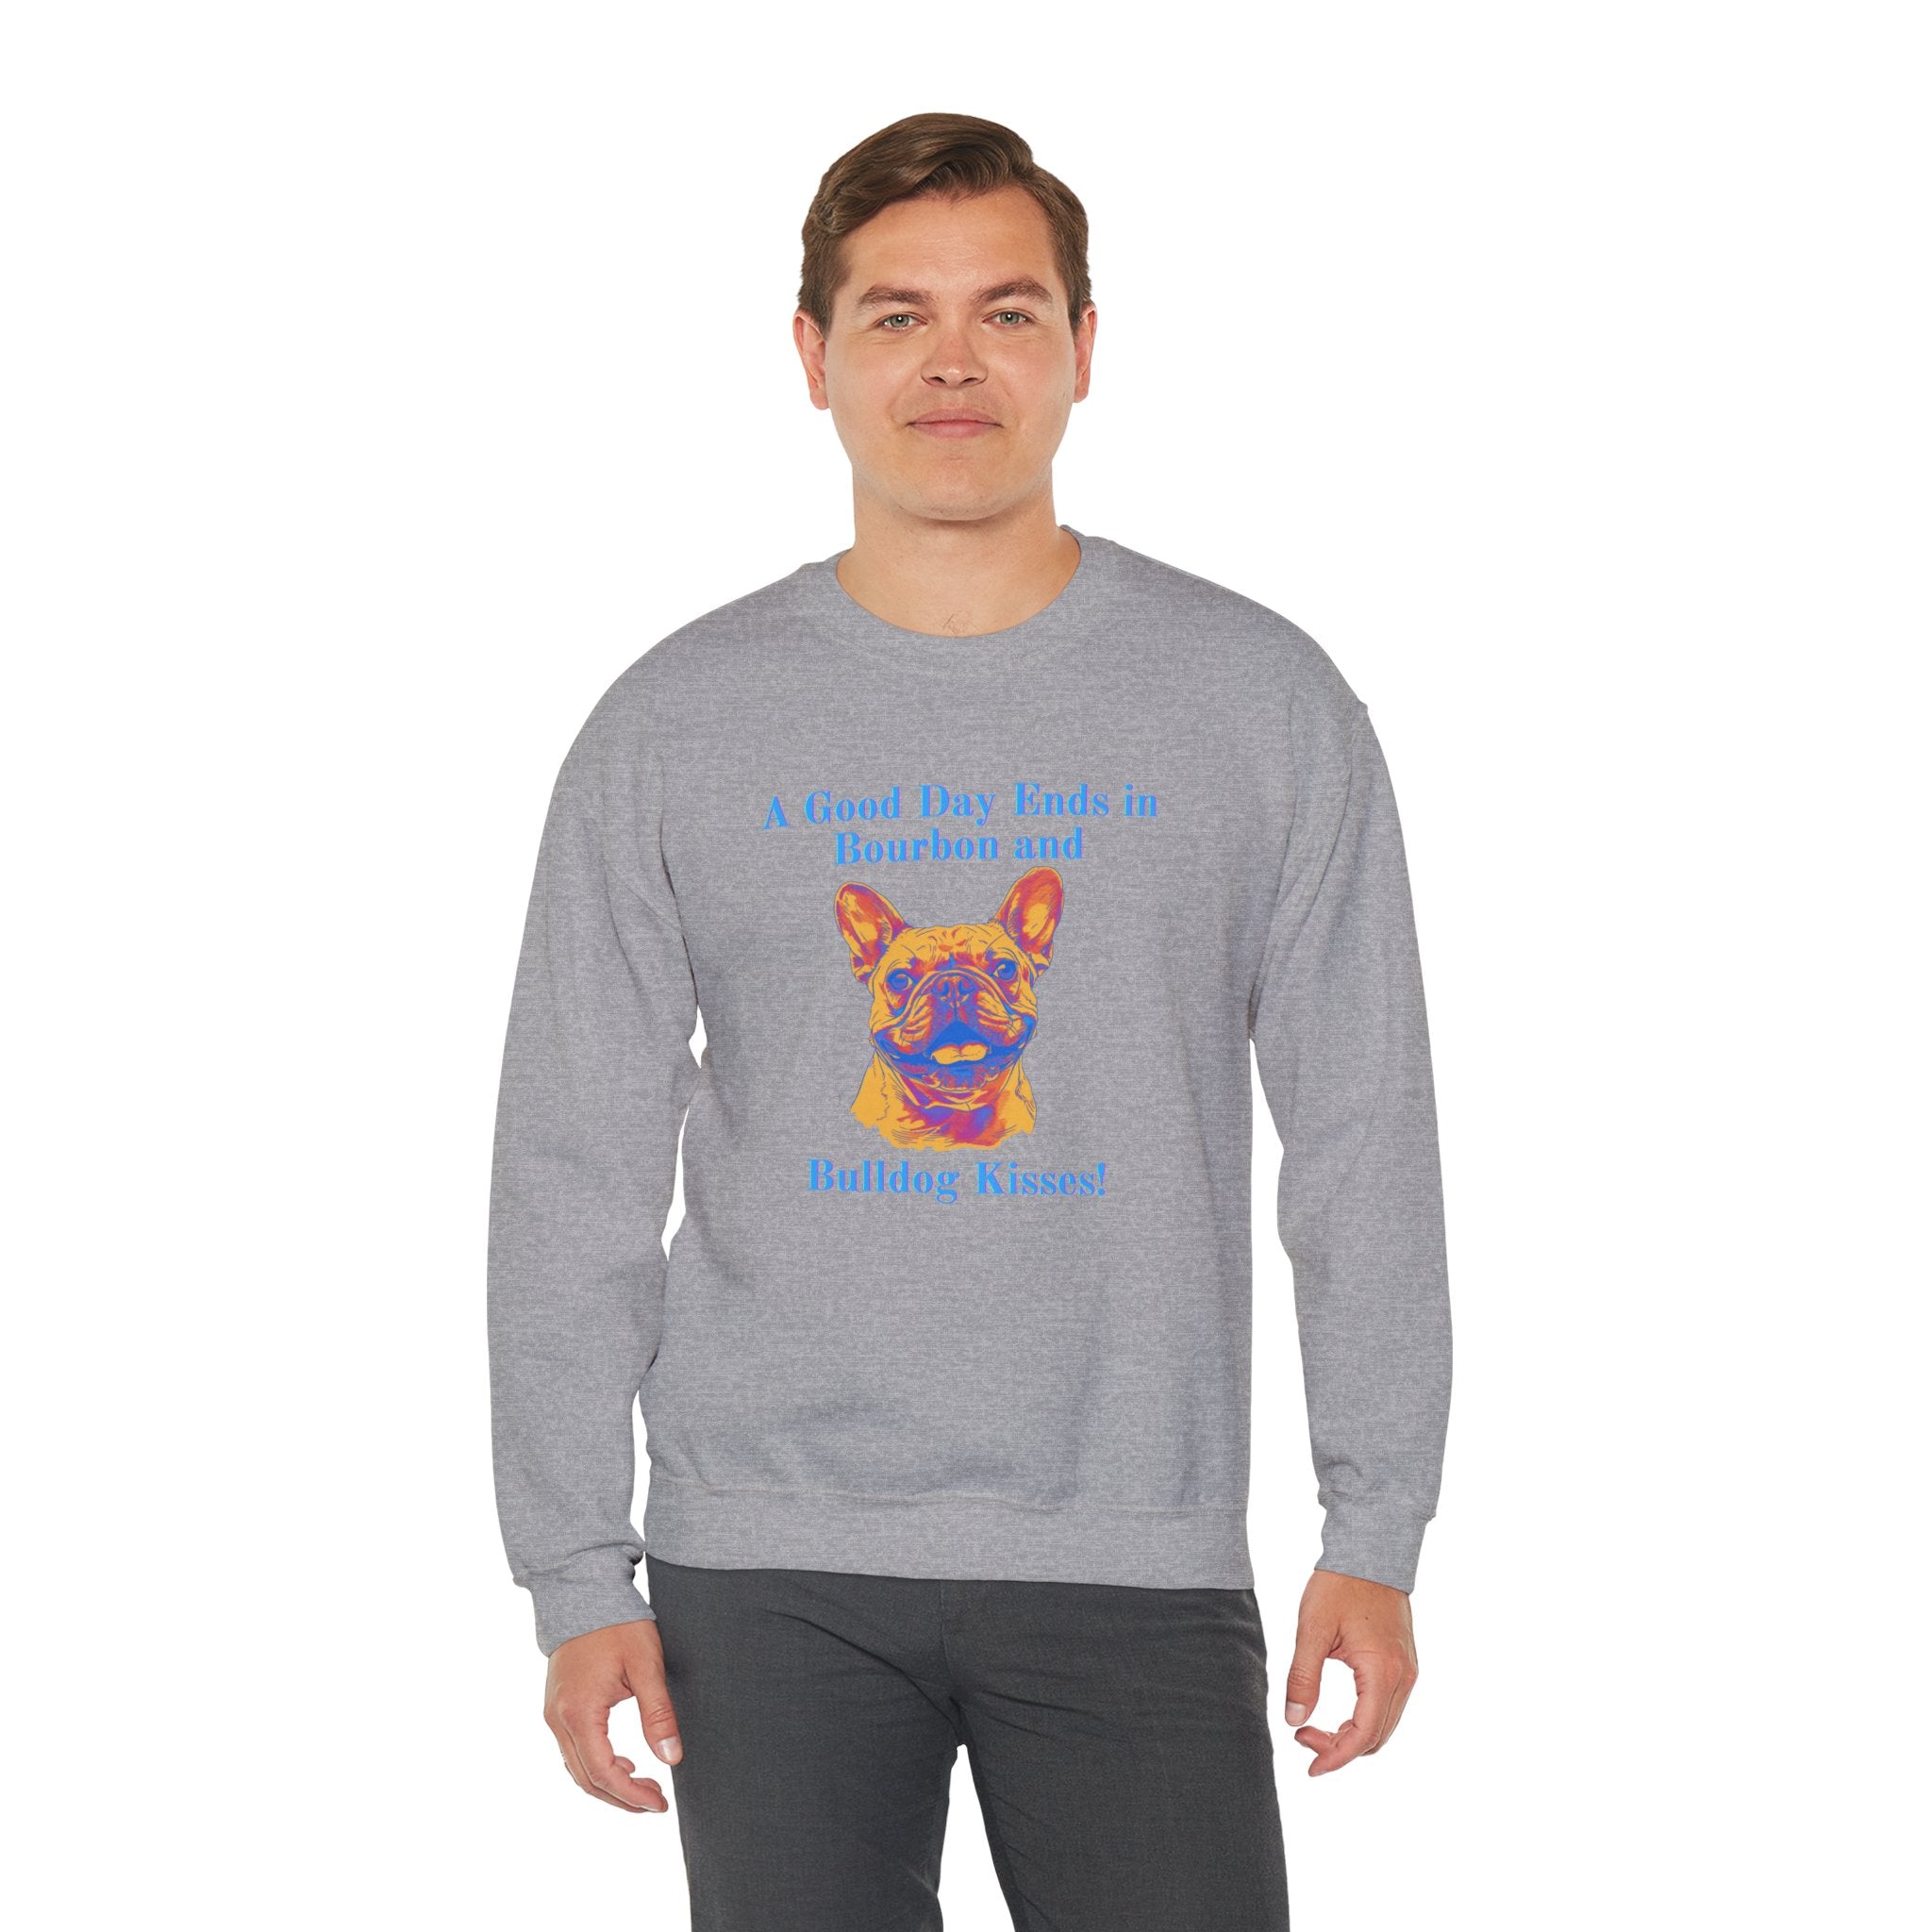 "A Good Day Ends in Bourbon and Bulldog Kisses!" Bulldog Crew Neck Sweatshirt (French)